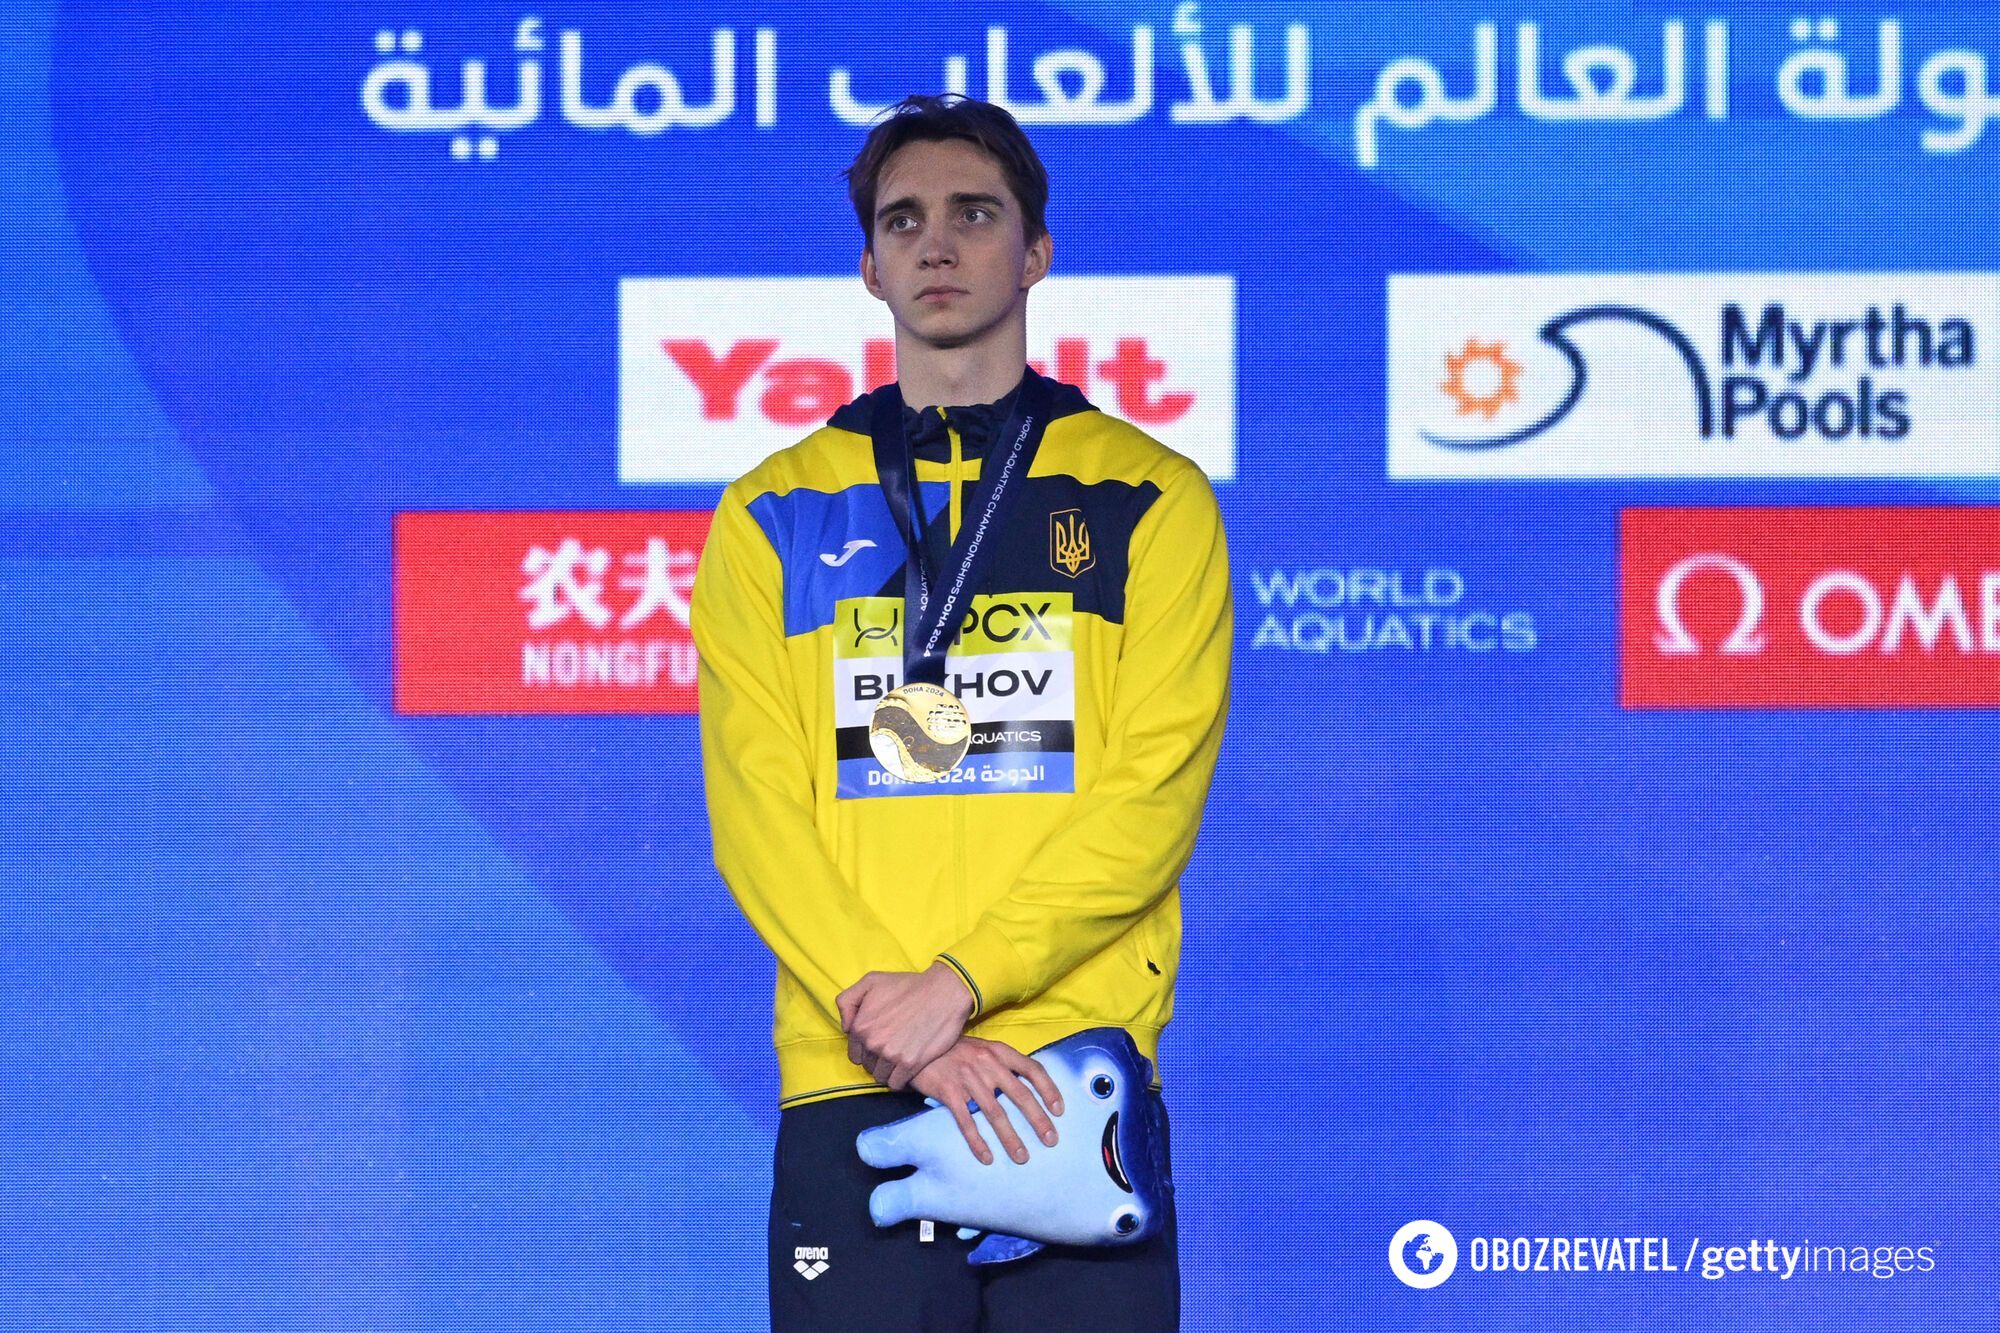 For the first time in history! Ukrainian swimmer sensationally wins the World Championships, beating his opponent by 0.01 seconds